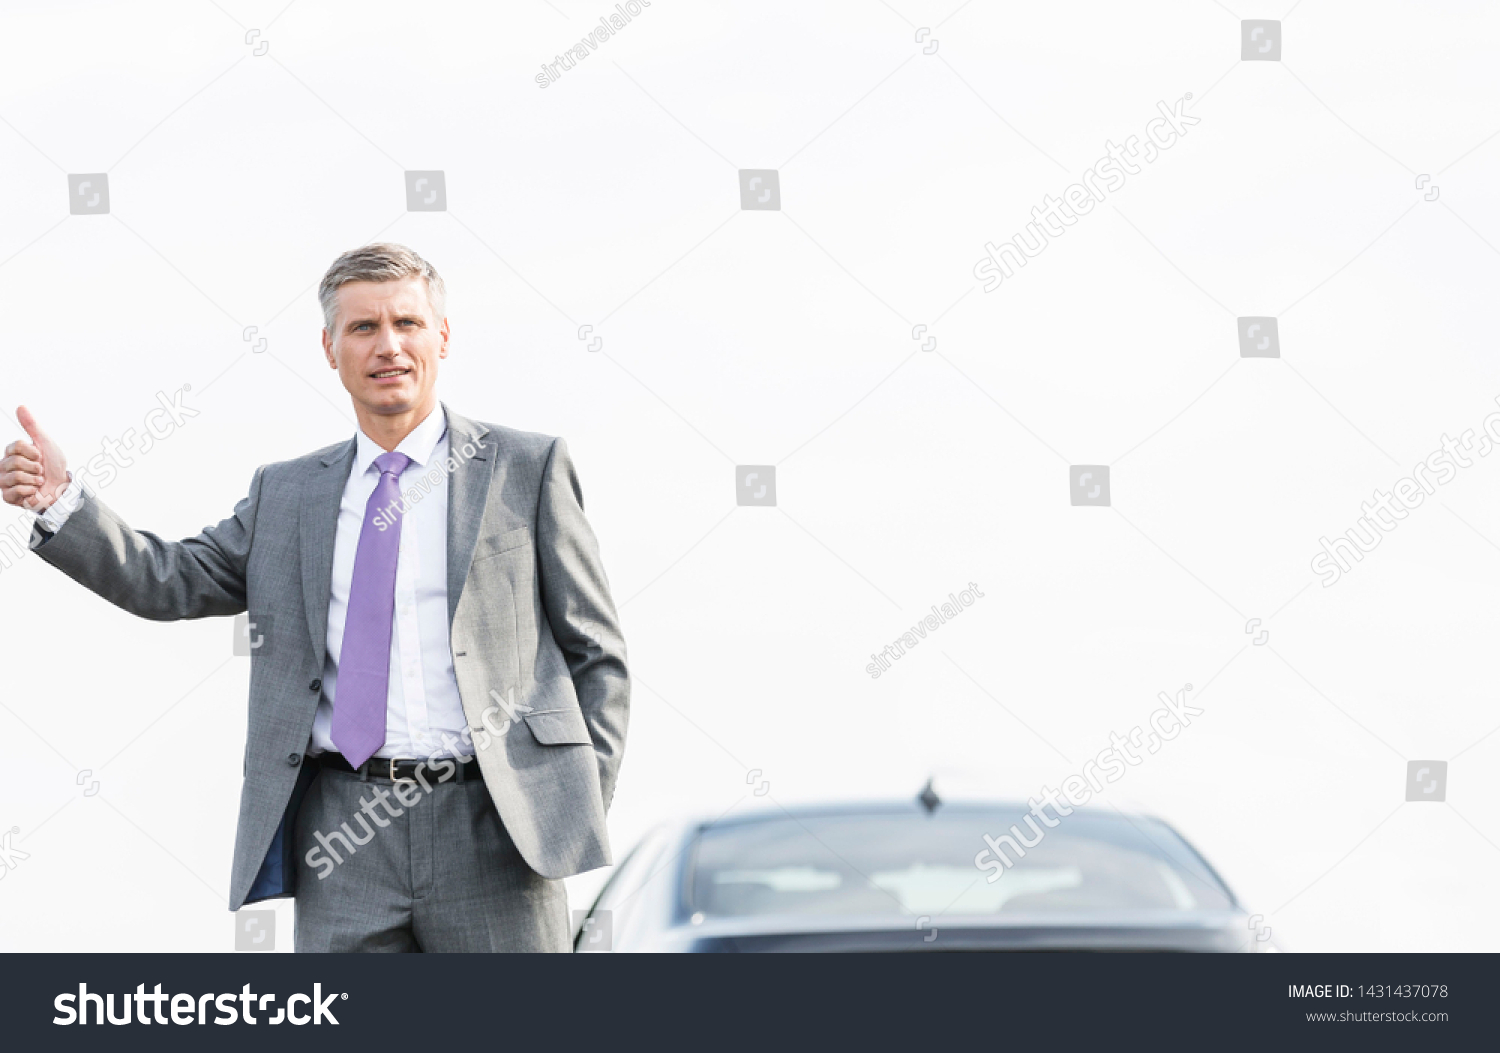 Business professional hitchhiking by breakdown car against sky #1431437078